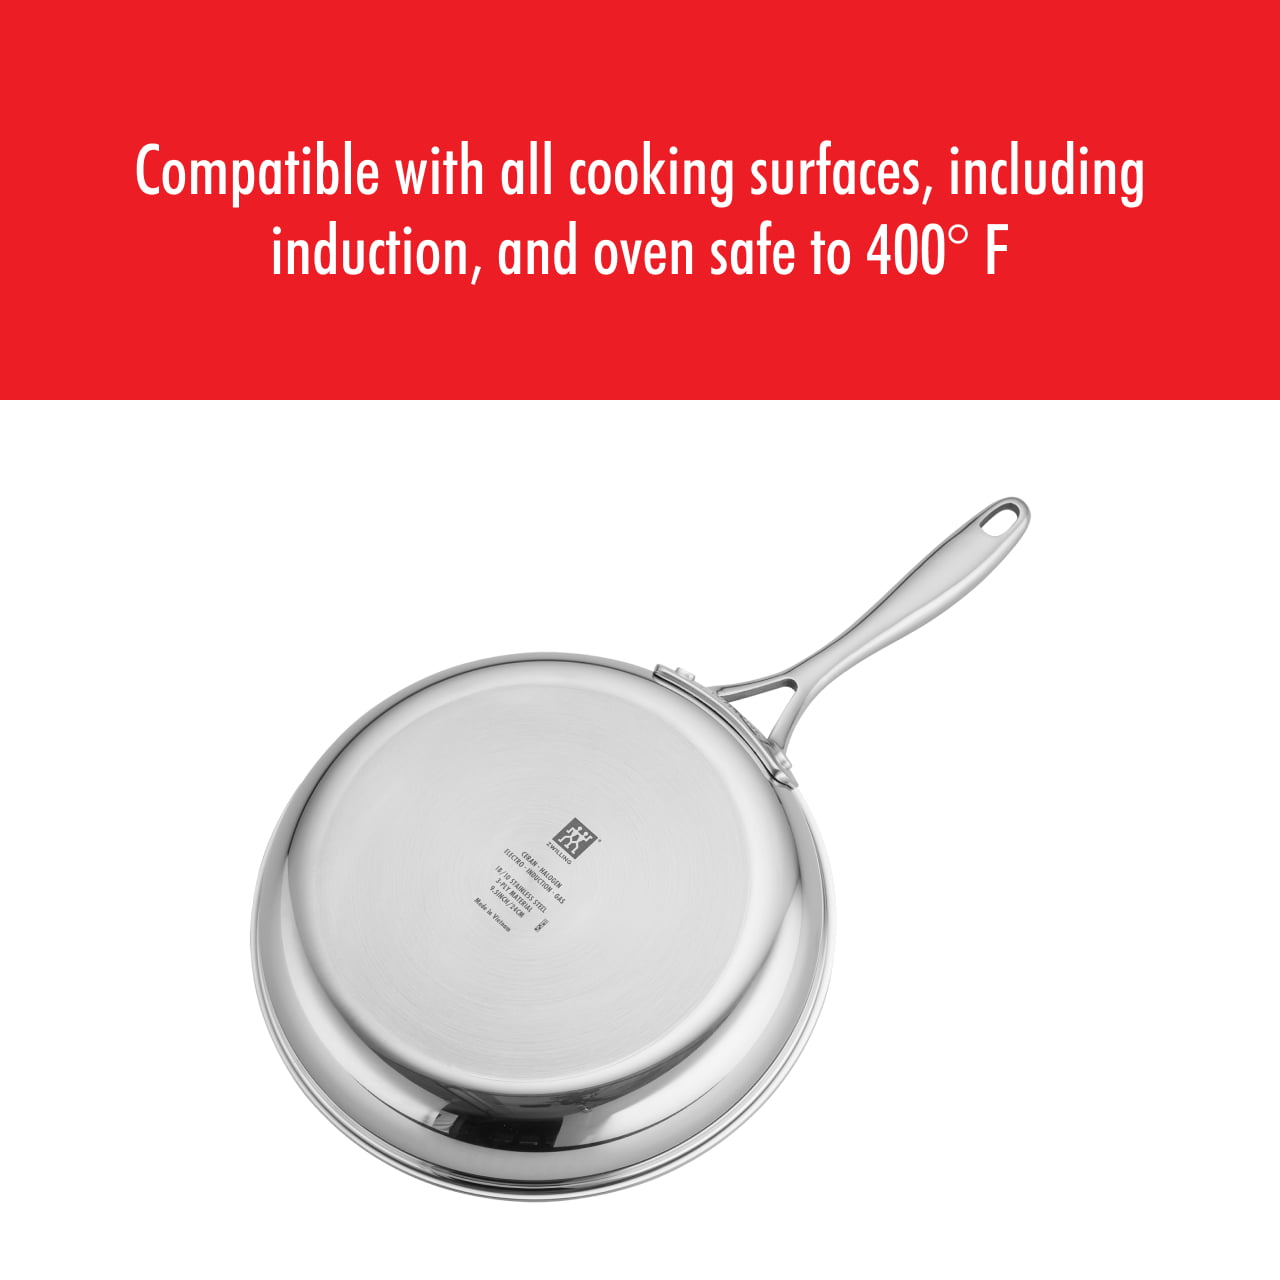 Zwilling Clad Cfx 12-inch Stainless Steel Ceramic Nonstick Fry Pan : Target